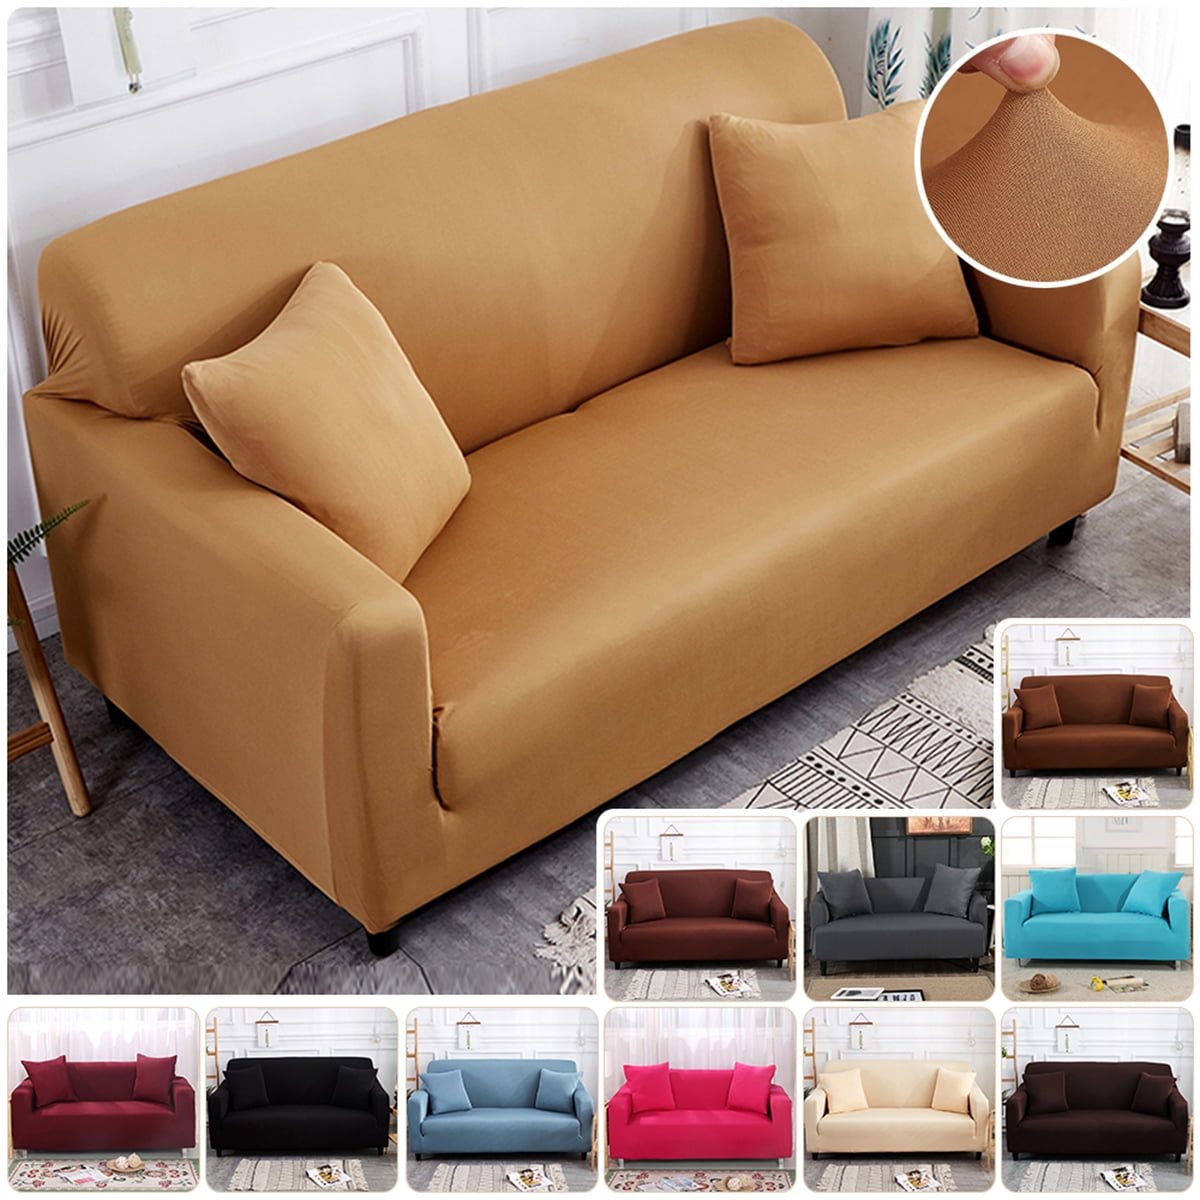 Details about   Plush L Shaped Sofa Cover Living Room Elastic Furniture Couch Slipcover Covers 